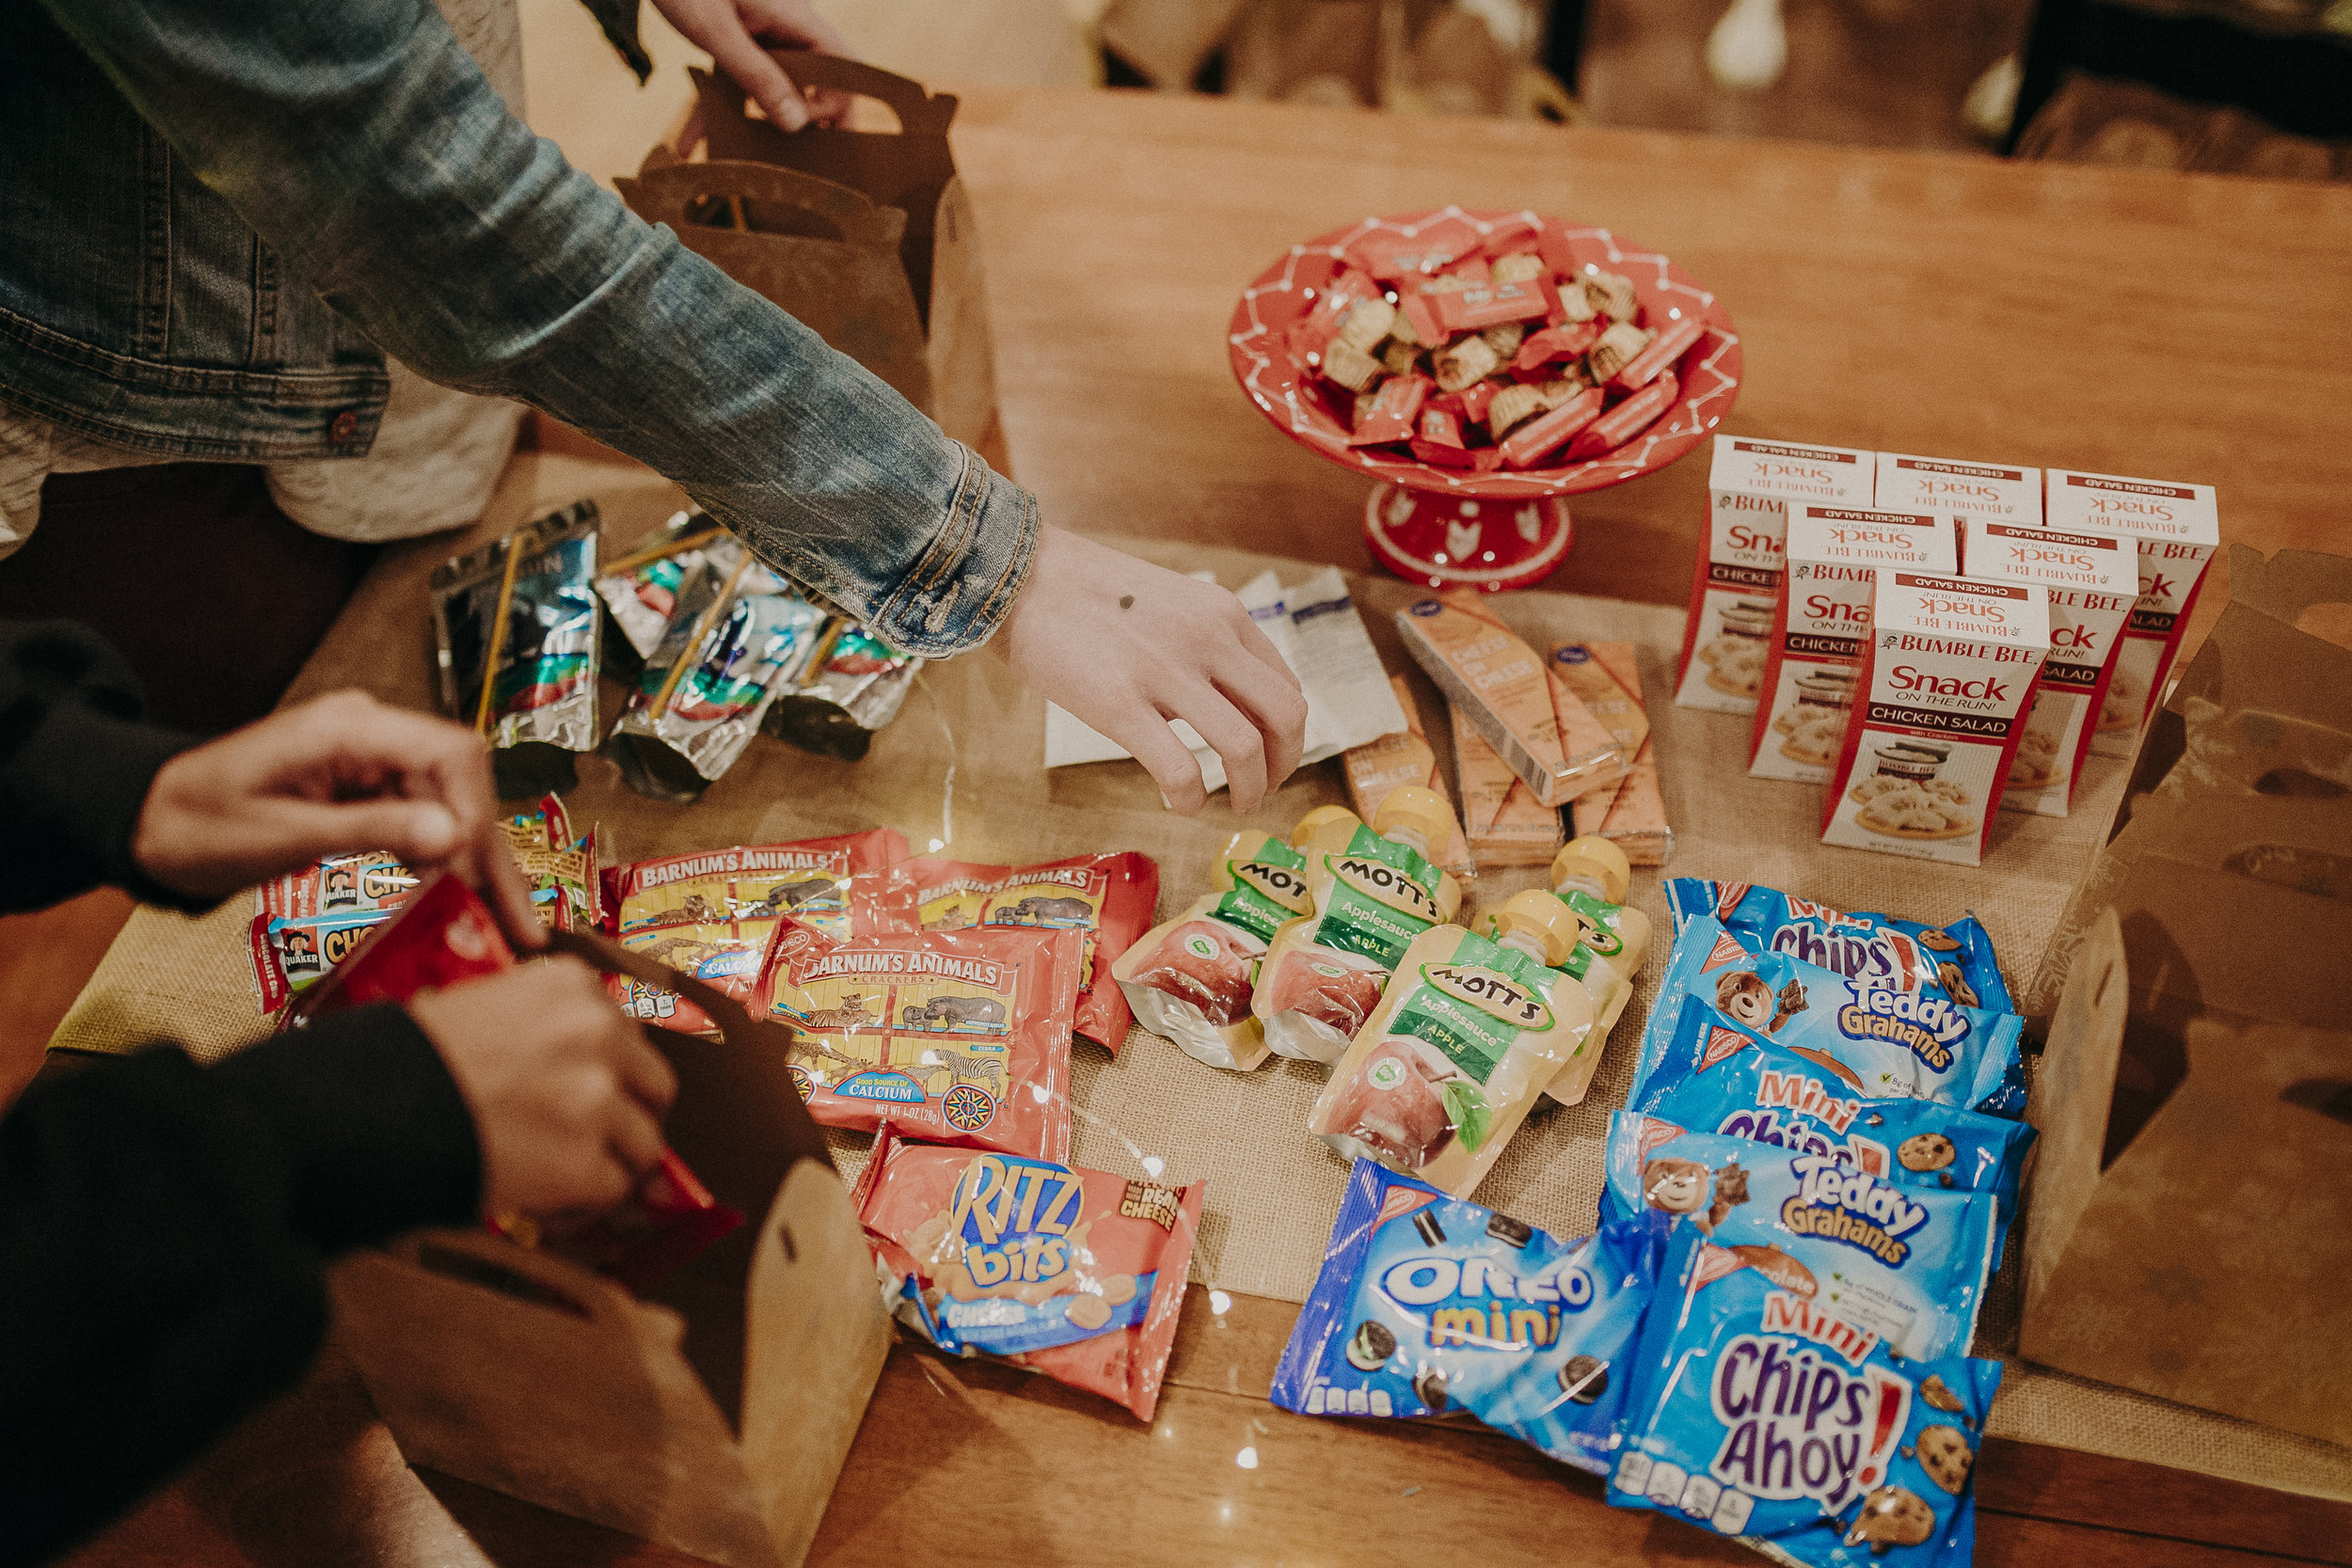  Once the boxes were all assembled, it was time to fill them. I tried to get a variety of foods, to satisfy any craving. From chocolates, to chicken salad with crackers, to applesauce. I hoped there was something for everyone. 